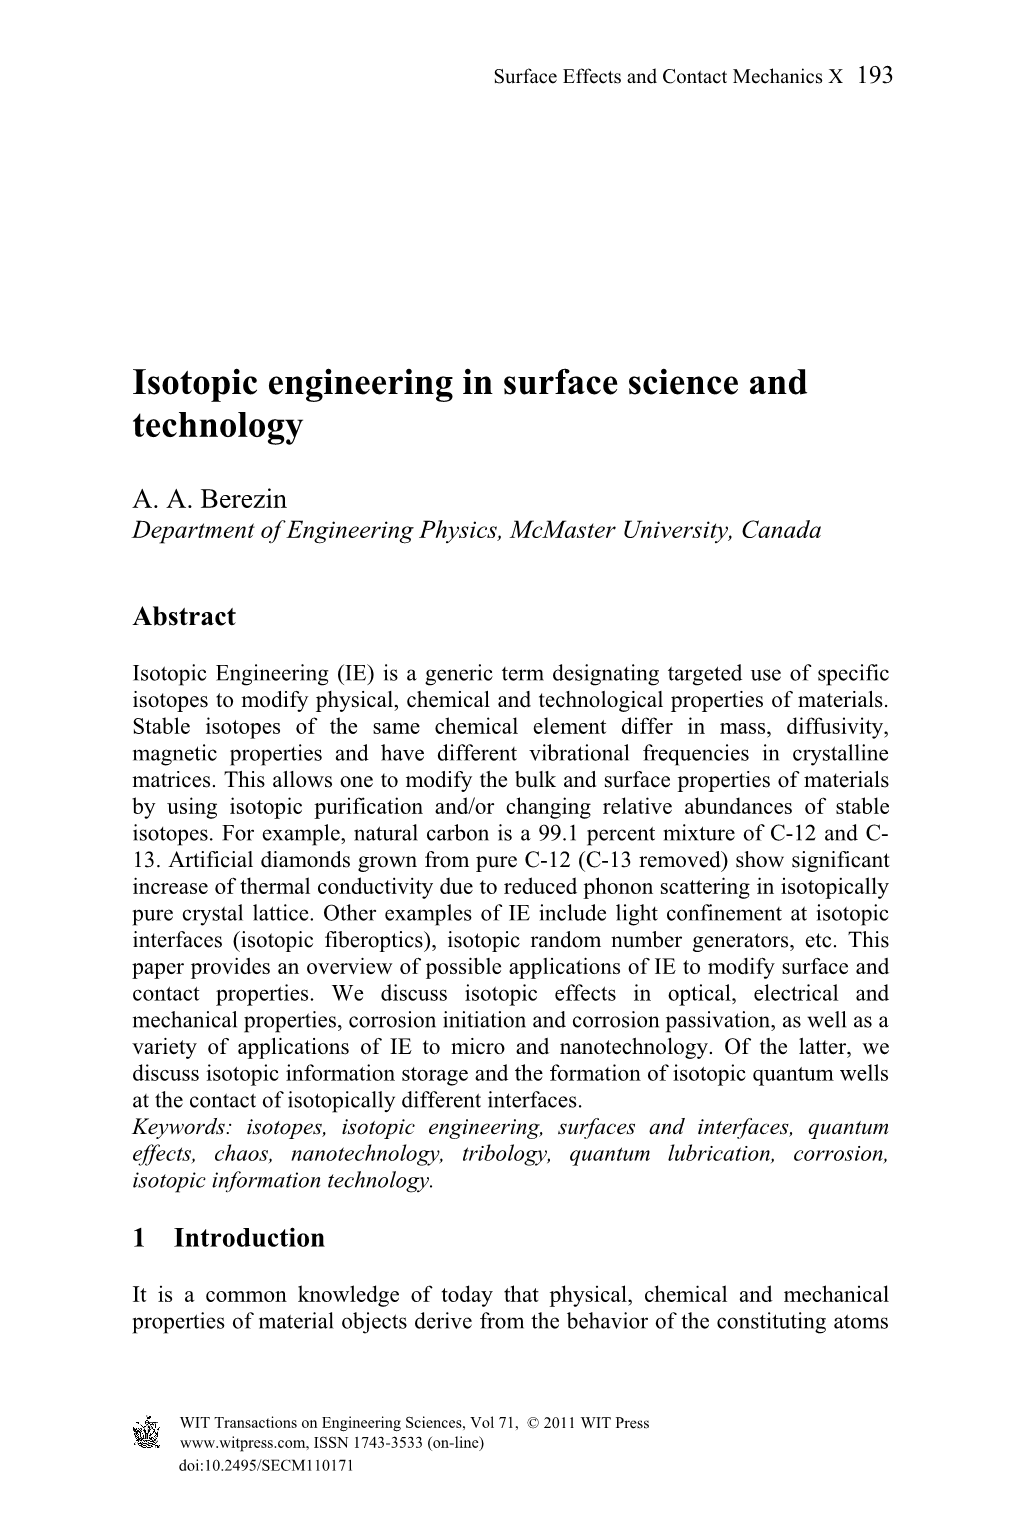 Isotopic Engineering in Surface Science and Technology